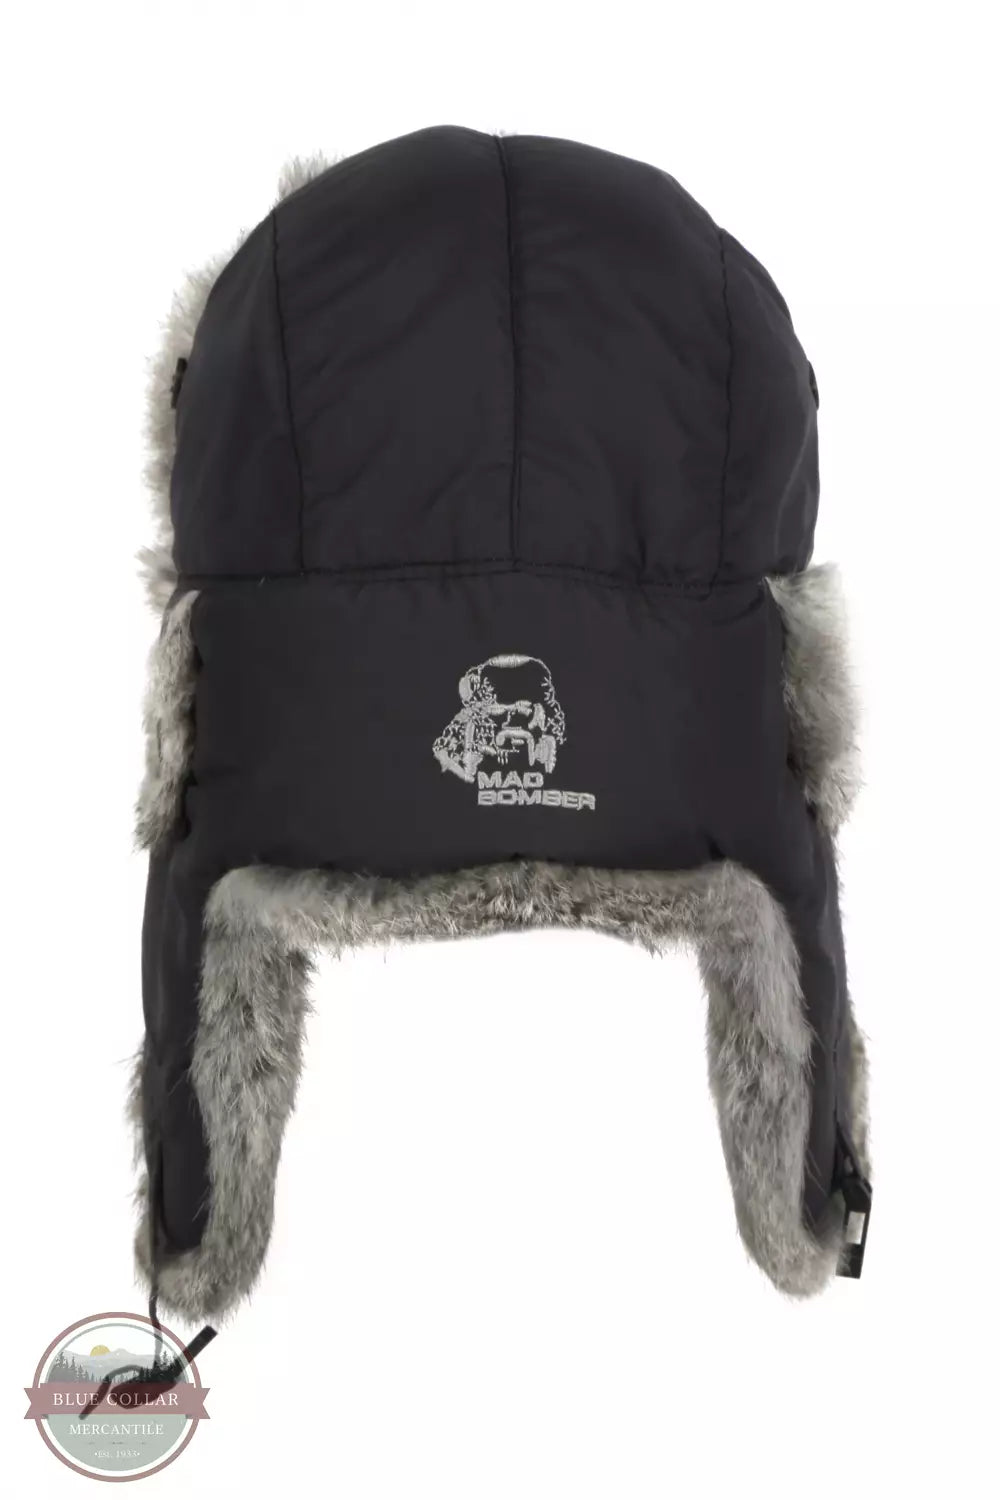 Mad Bomber 304BLK Black Supplex Bomber Hat with Grey Fur Back View